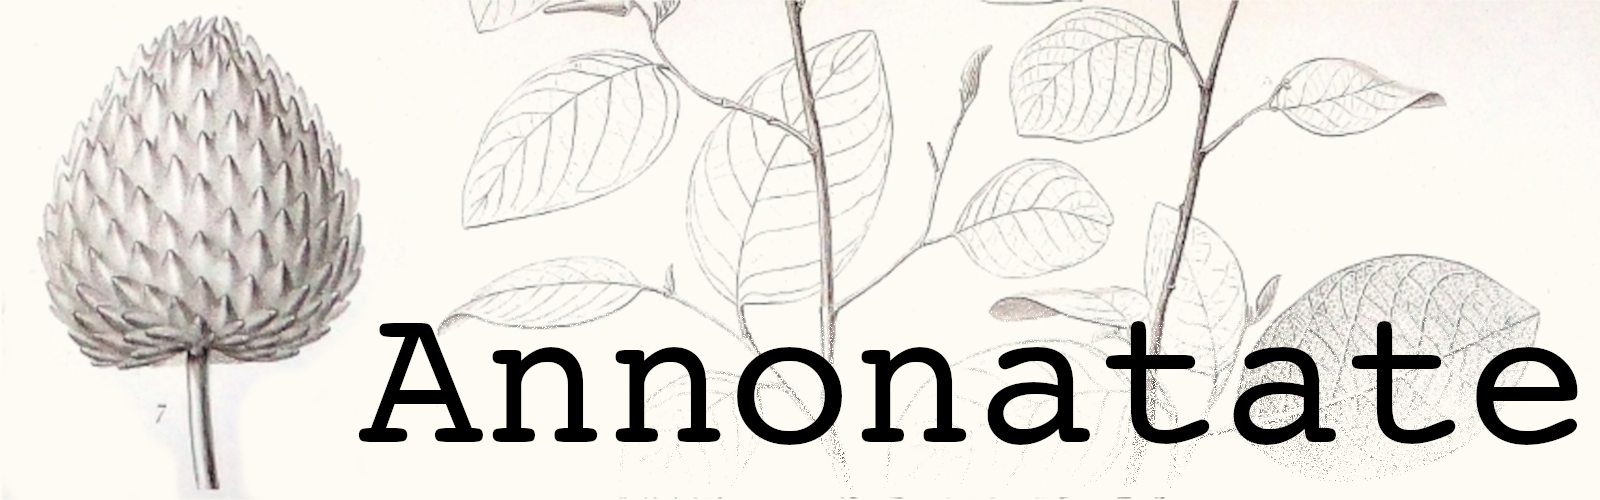 Text Annonatate over an annona plant